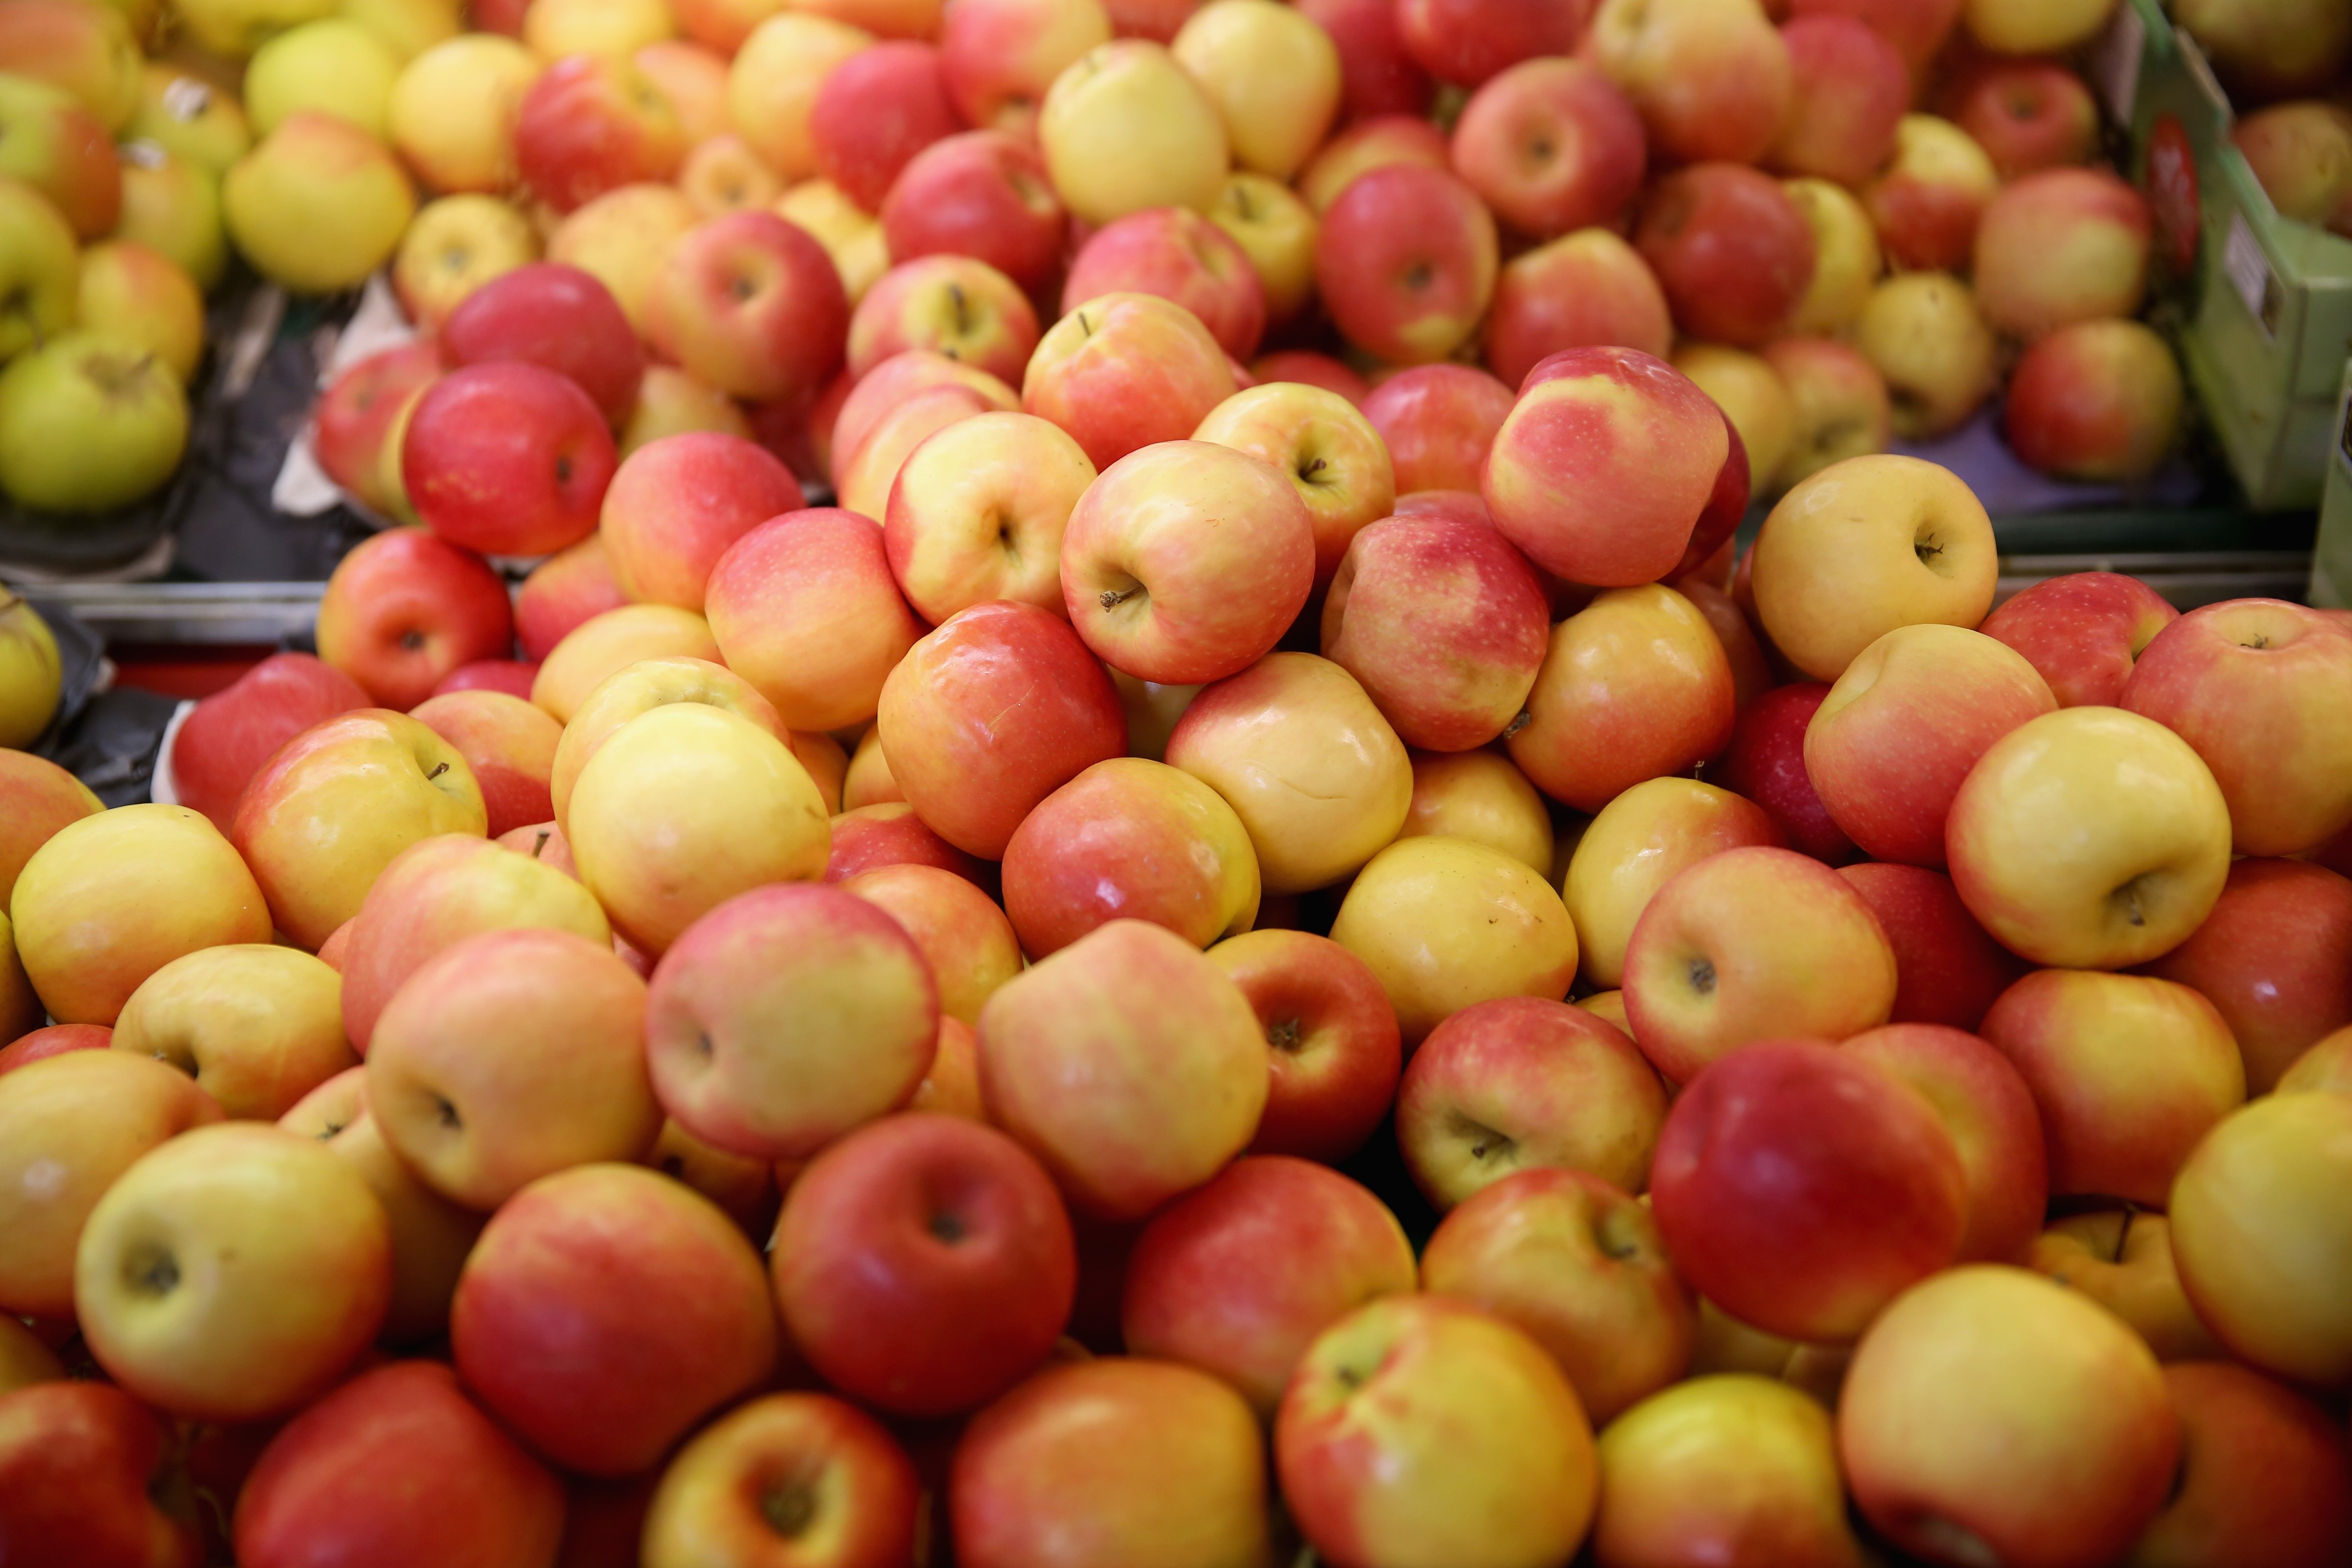 Apples are displayed for sale at a shop on April 1, 2014 in Northwich, United Kingdom. (Christopher Furlong—Getty Images)